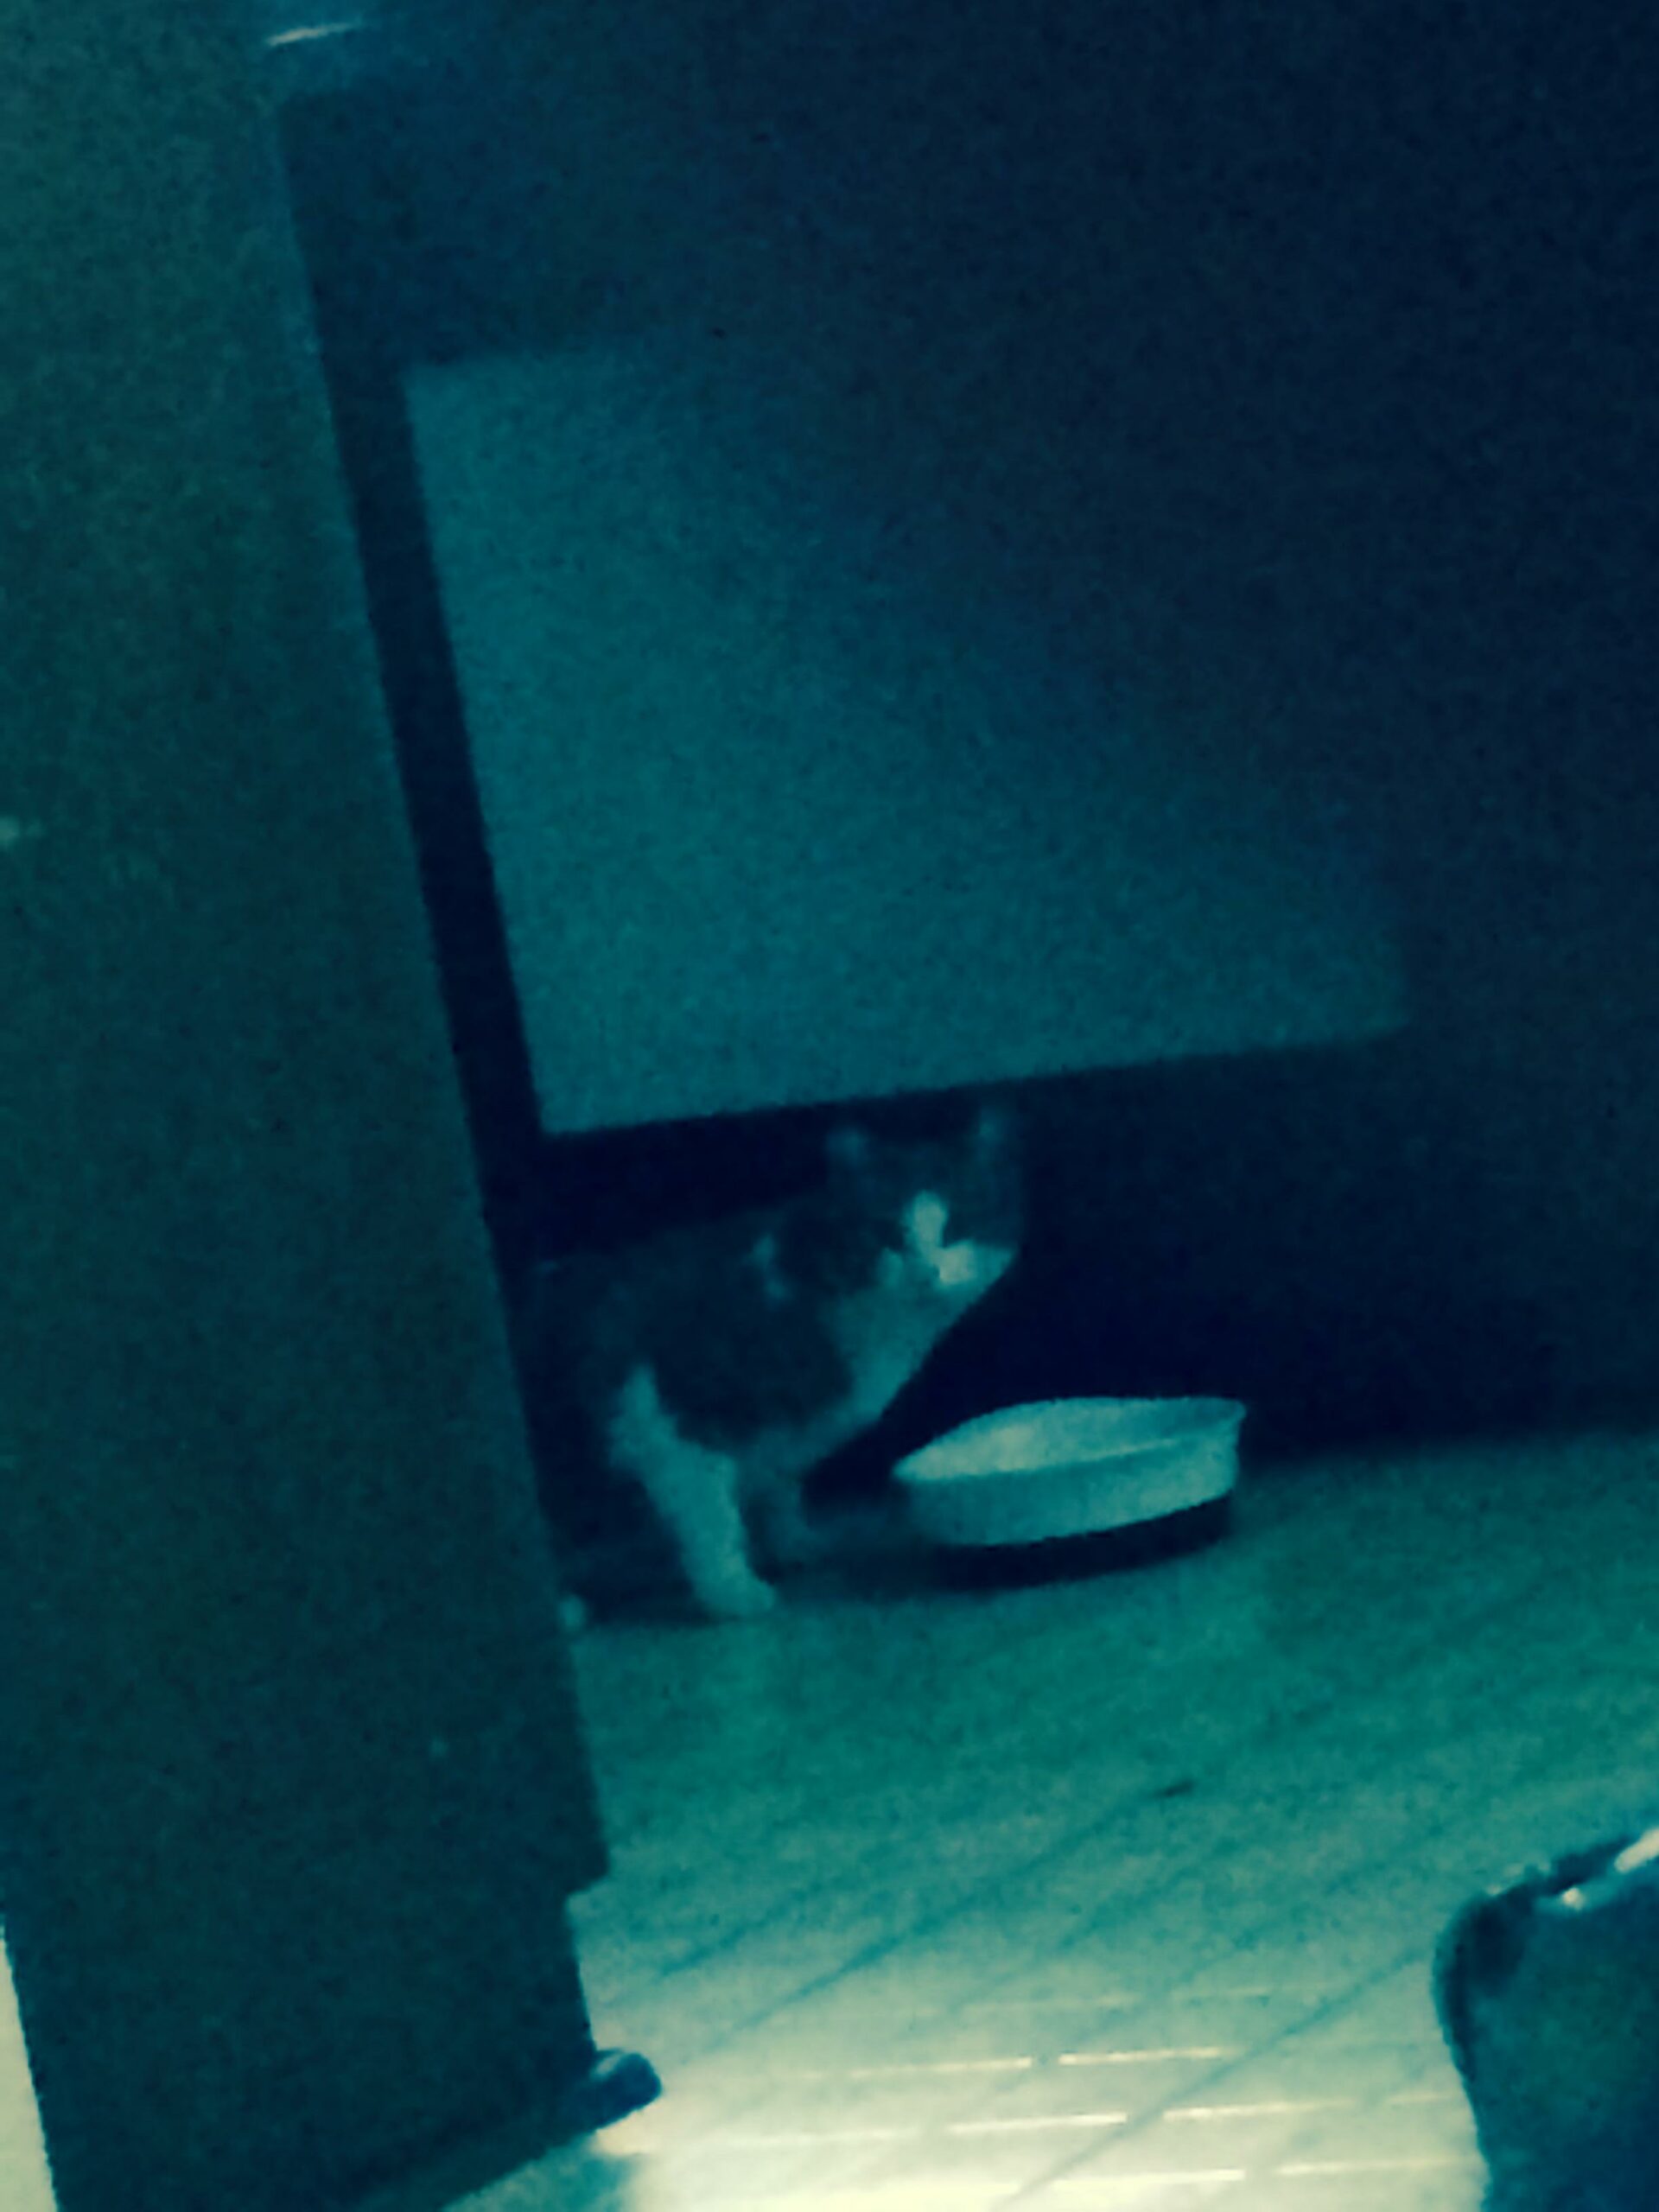 cat drinking from water bowl in the dark